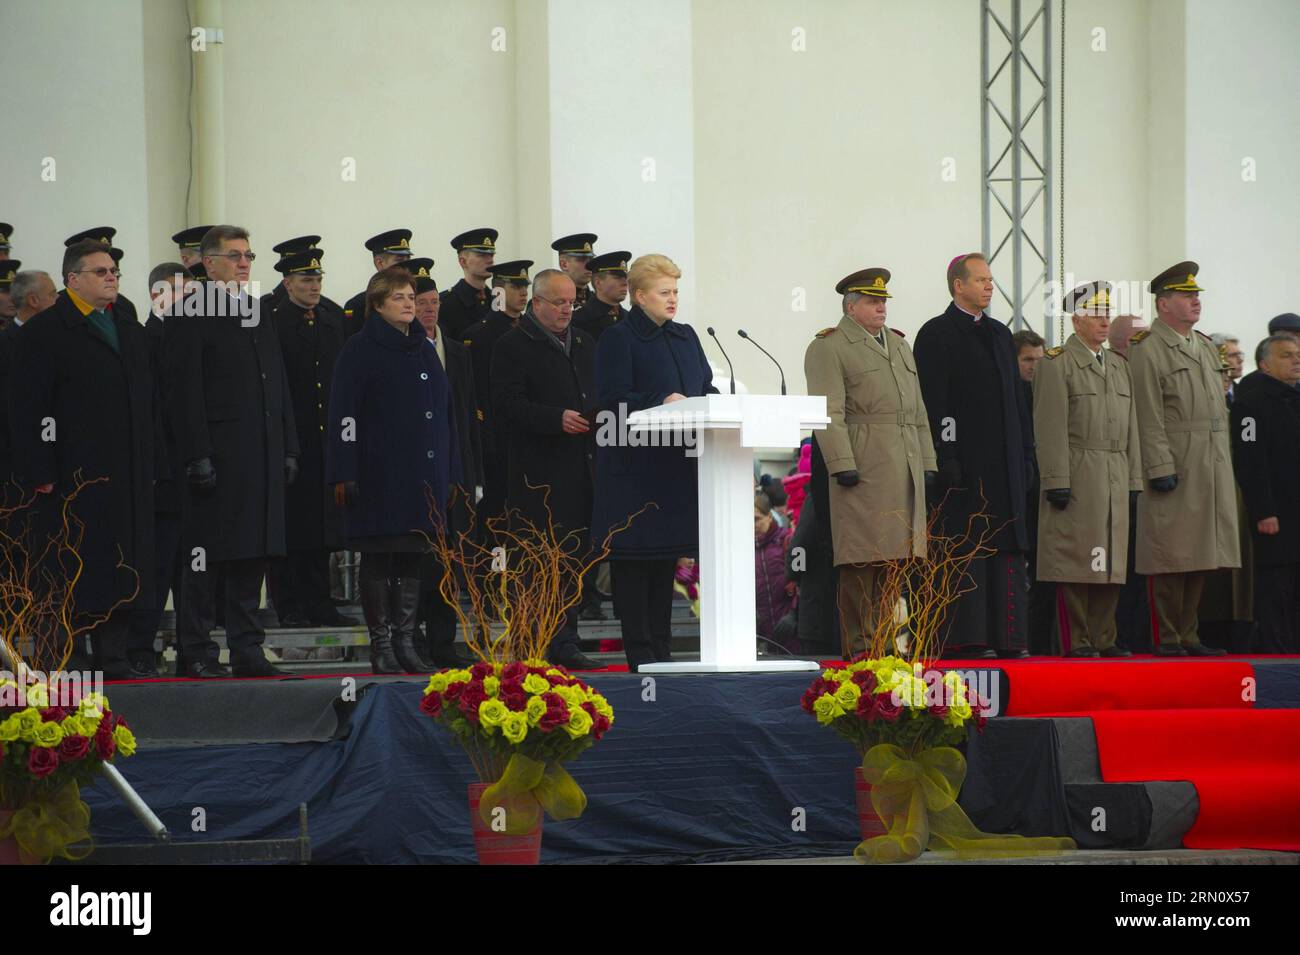 (141123) -- VILNIUS, Nov. 23, 2014 -- Lithuanian president Dalia Grybauskaite (C) addresses the audiences on the celebration in Vilnius, Lithuania, on Nov. 23, 2014. Lithuanian armed forces and troops of some NATO member countries held a gala with formation on Sunday to celebrate the Armed Forces Day. Lithuania s first decree on establishing armed forces was approved on Nov. 23, 1918, which became the Armed Forces Day of the Baltic country. )(bxq) LITHUANIA-VILNIUS-ARMED FORCES DAY AlfredasxPliadis PUBLICATIONxNOTxINxCHN   Vilnius Nov 23 2014 Lithuanian President Dalia Grybauskaite C addresses Stock Photo